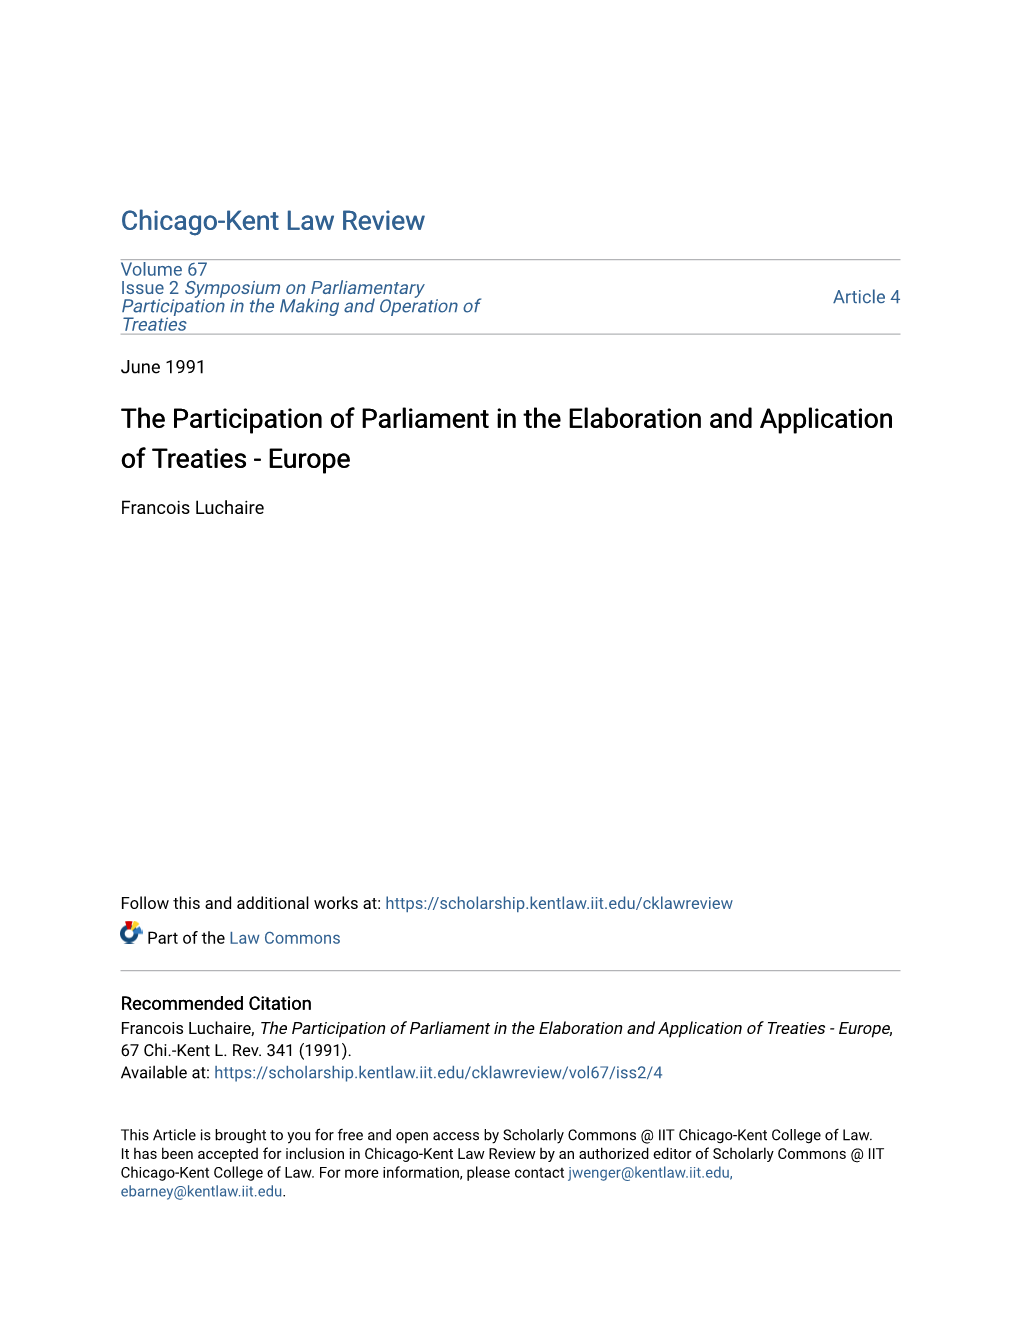 The Participation of Parliament in the Elaboration and Application of Treaties - Europe